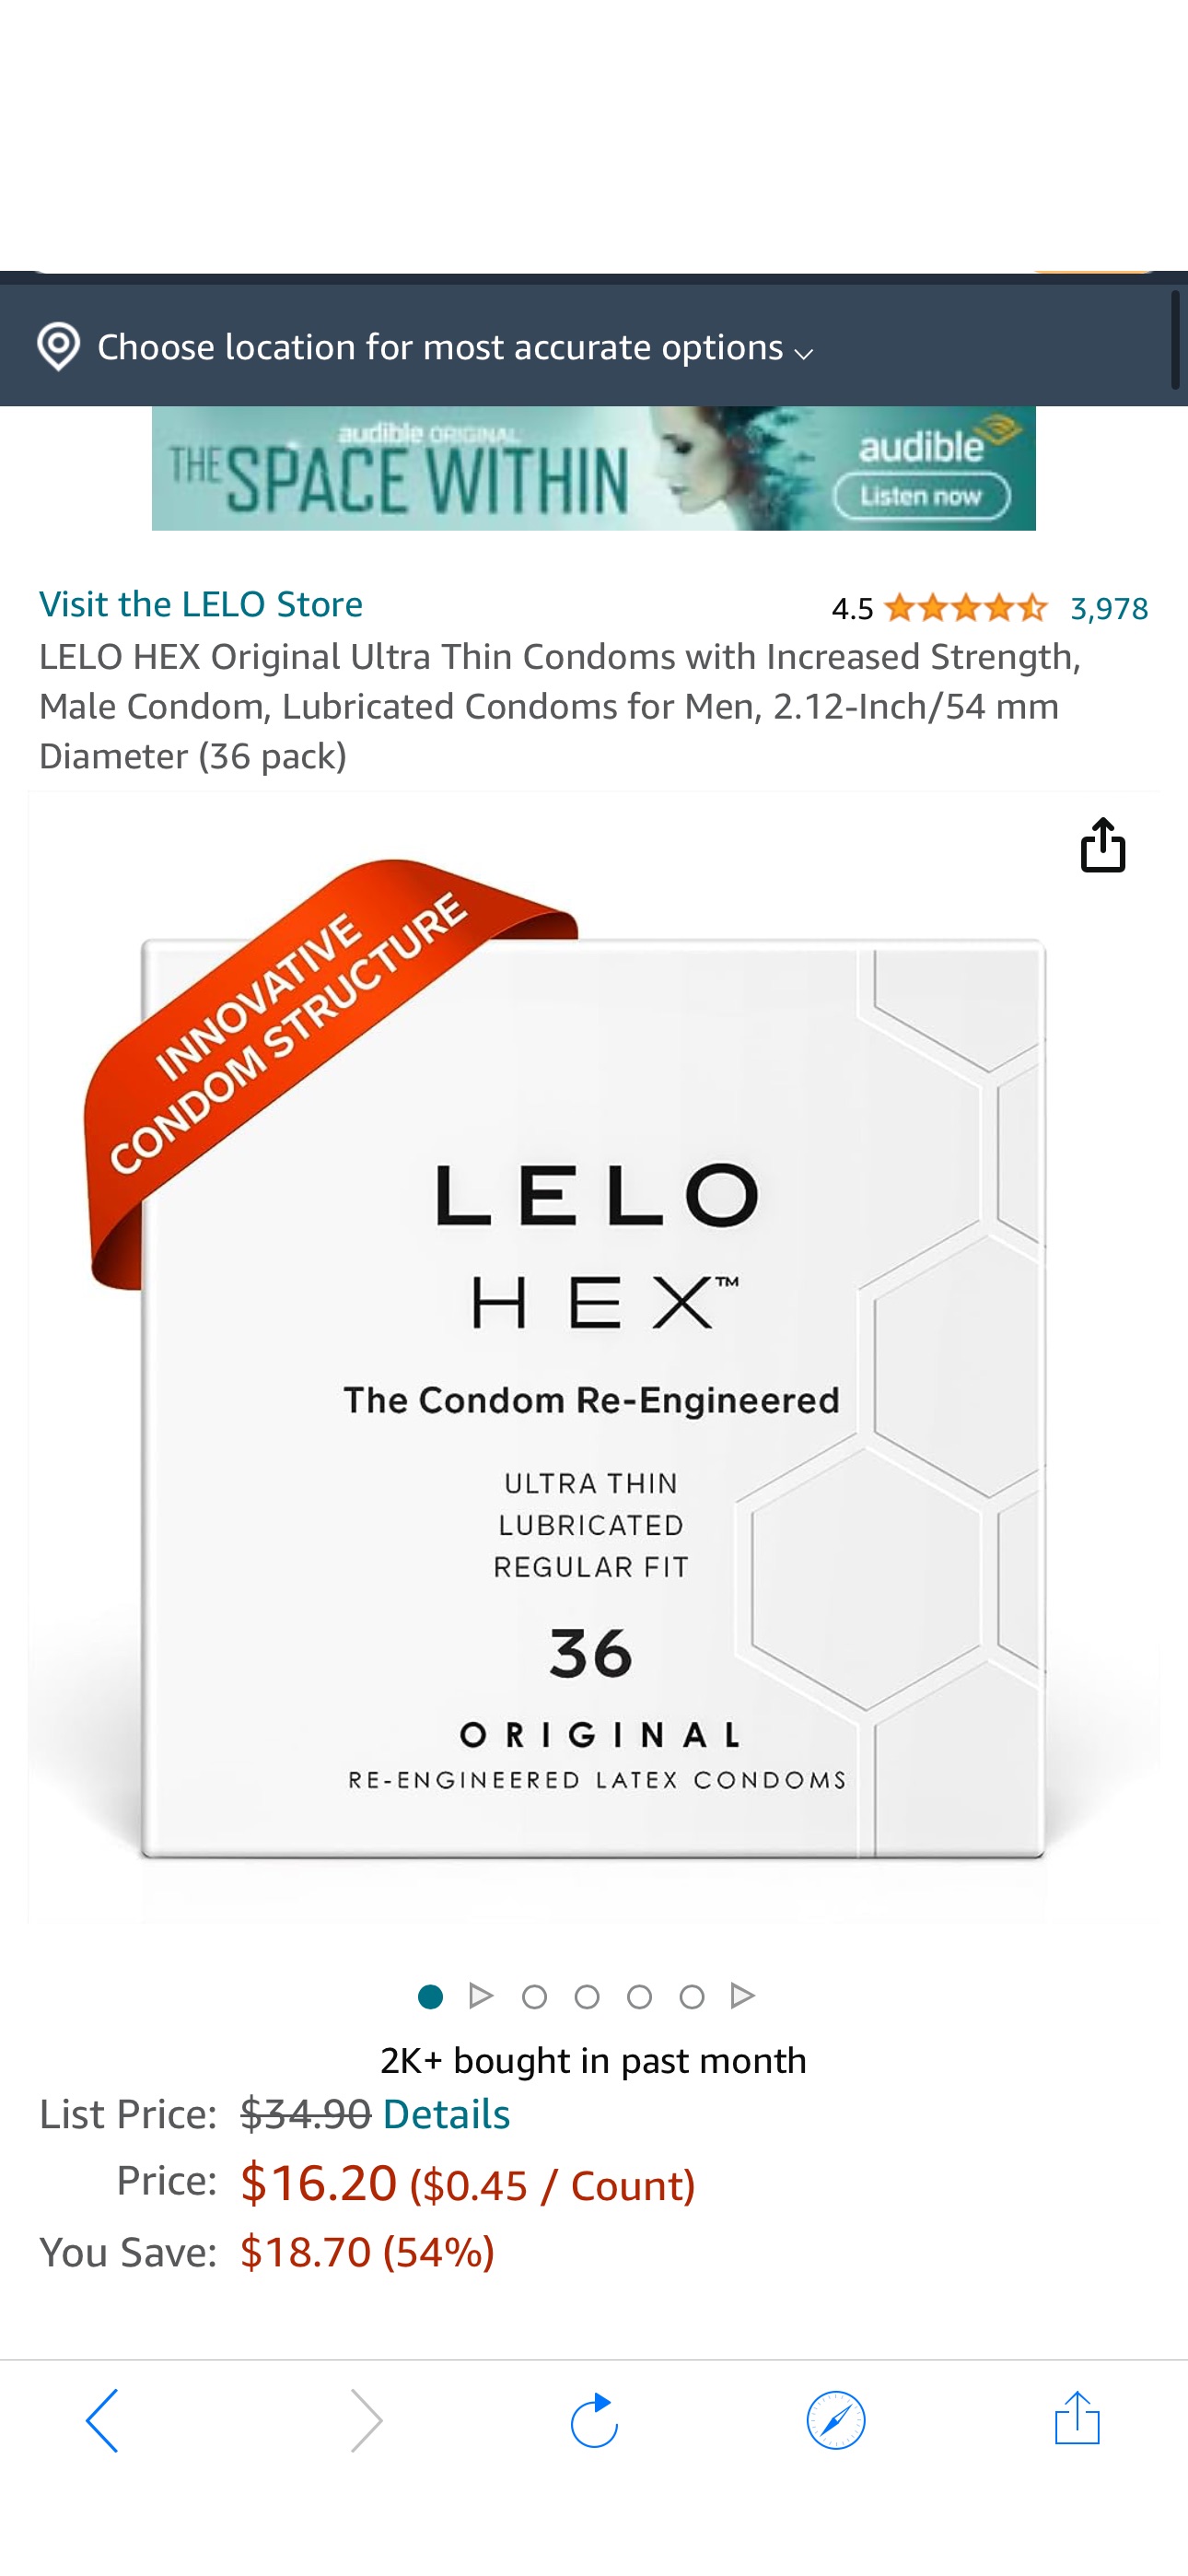 Amazon.com: LELO HEX Original Ultra Thin Condoms with Increased Strength, Male Condom, Lubricated Condoms for Men, 2.12-Inch/54 mm Diameter (36 Pack) : Health & Household